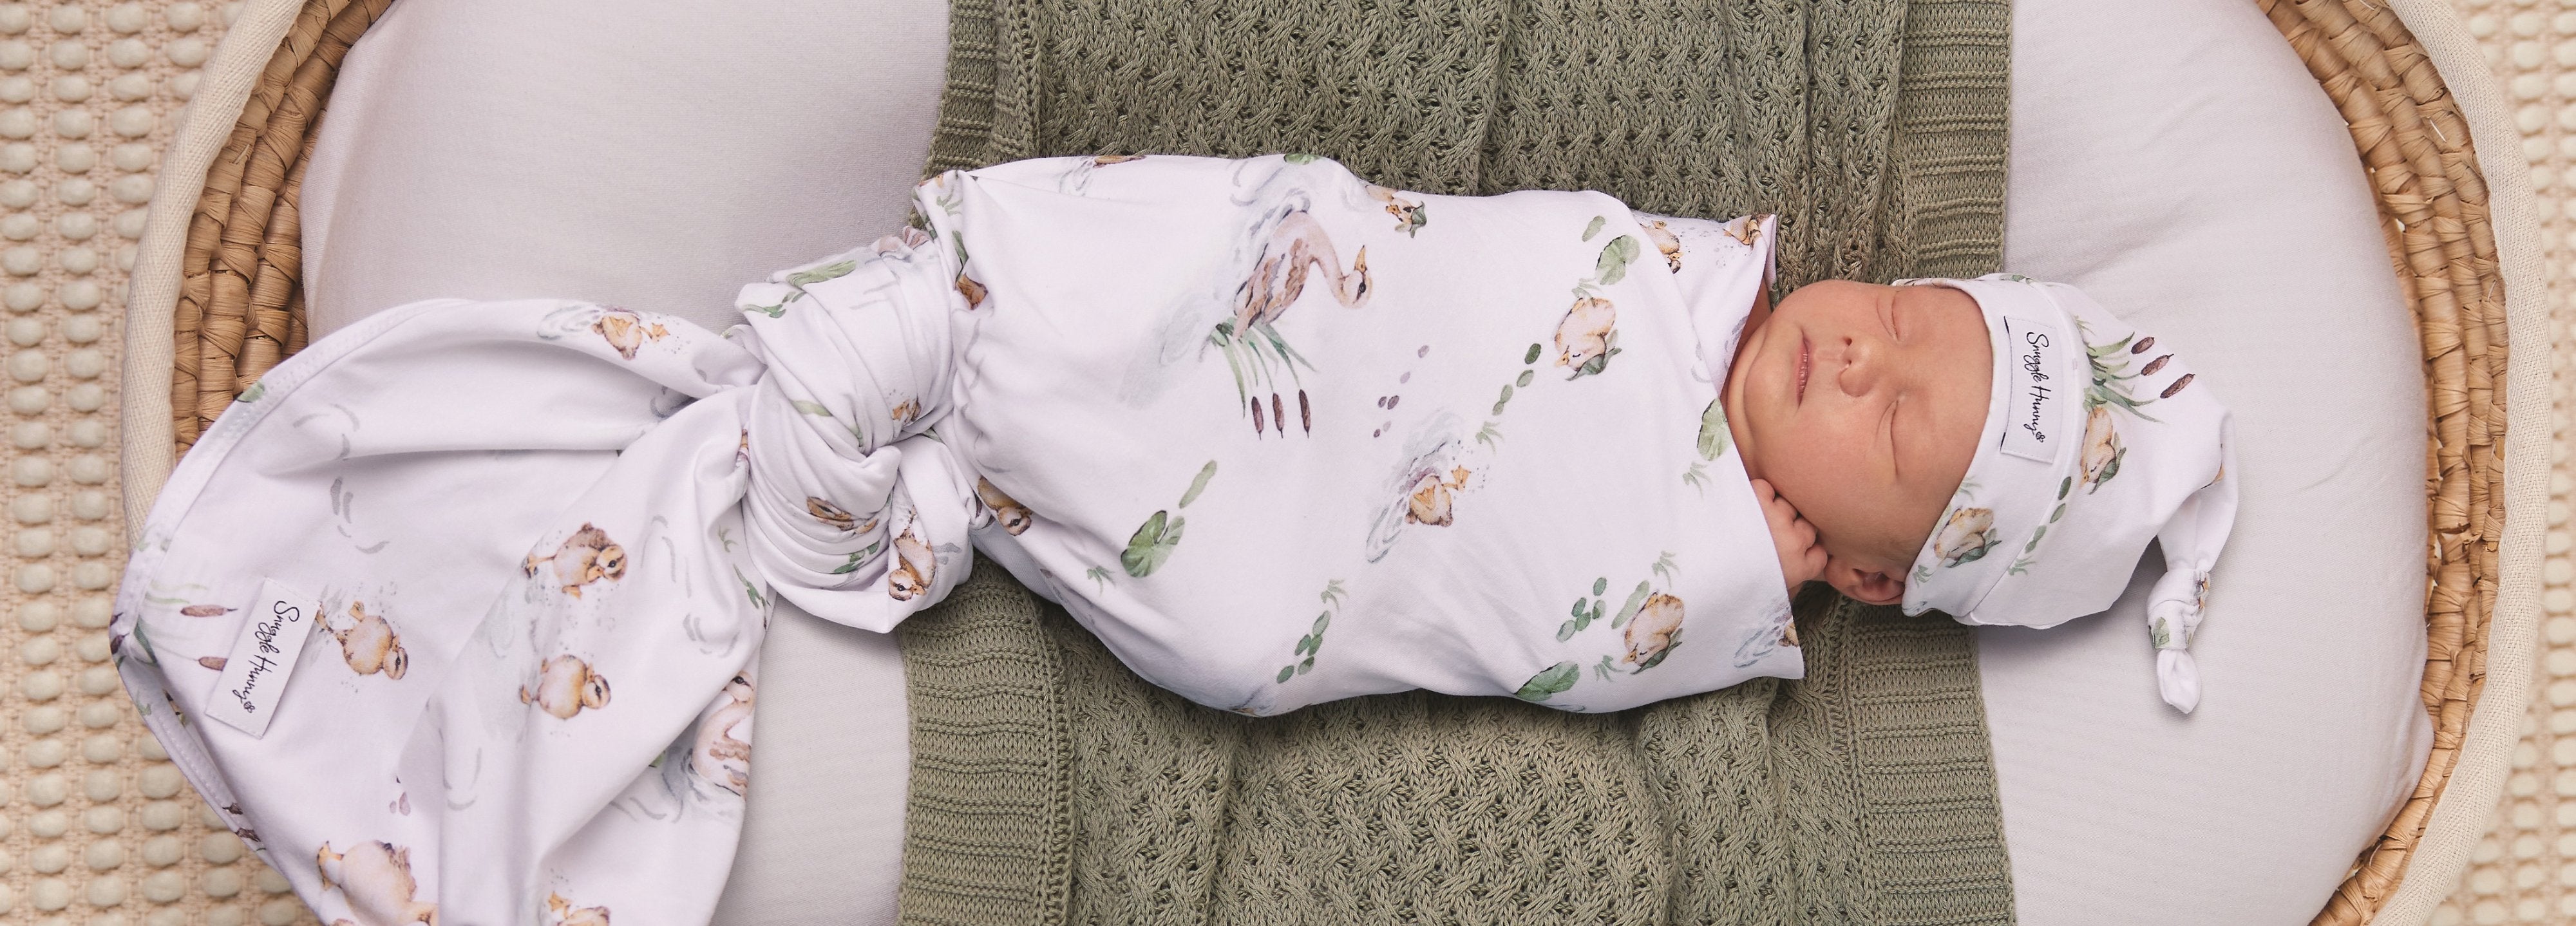 Room to Bloom Baby Swaddles & Wraps collection